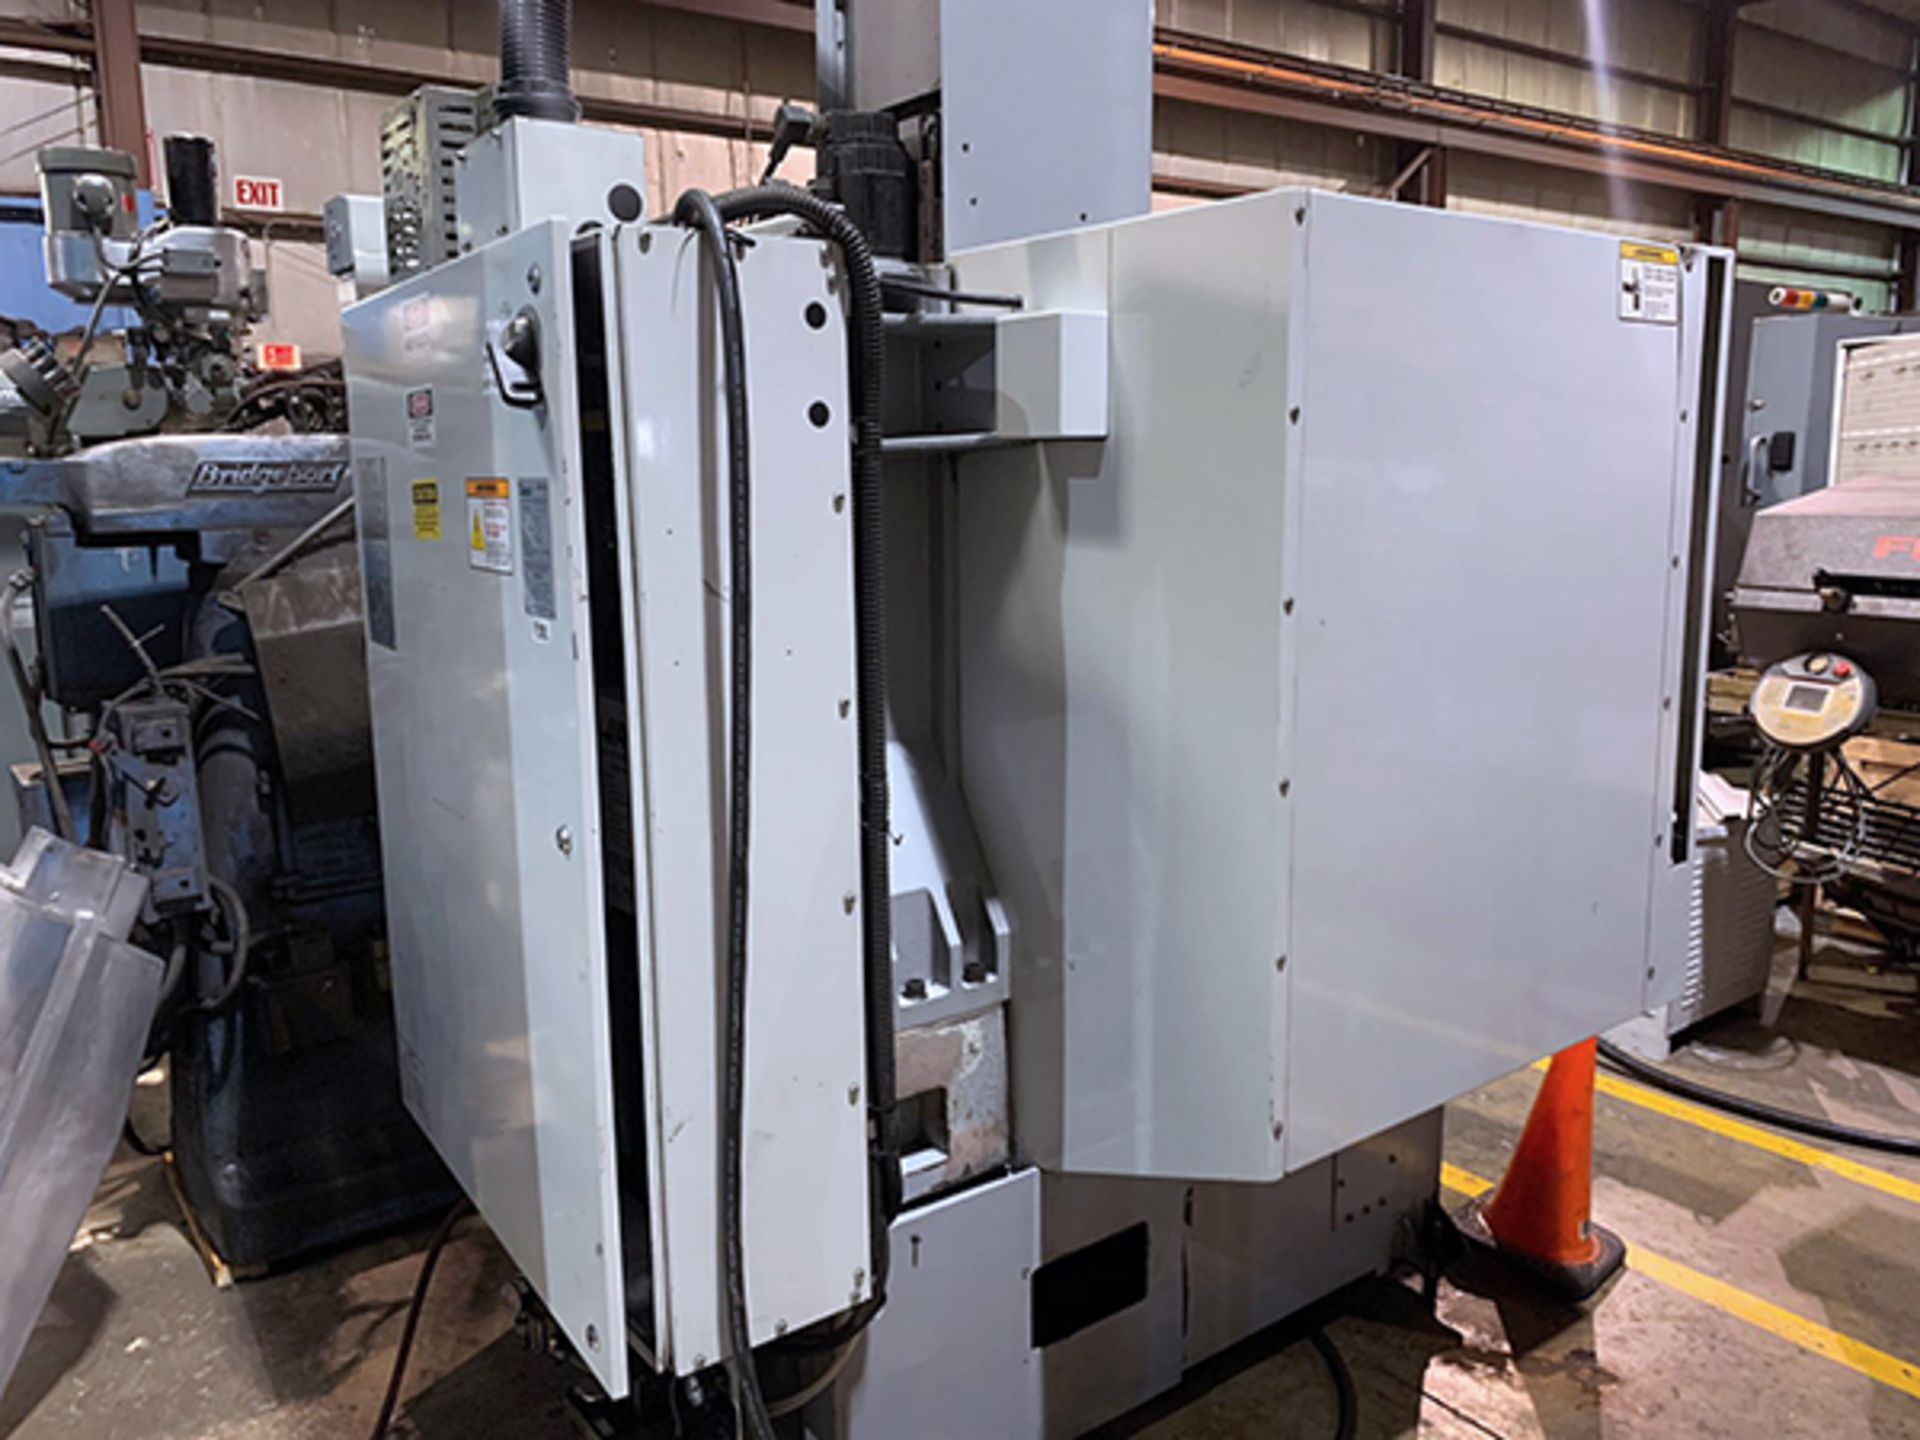 Haas Mini Mill Vertical Machining Center (2005) - Image 8 of 10